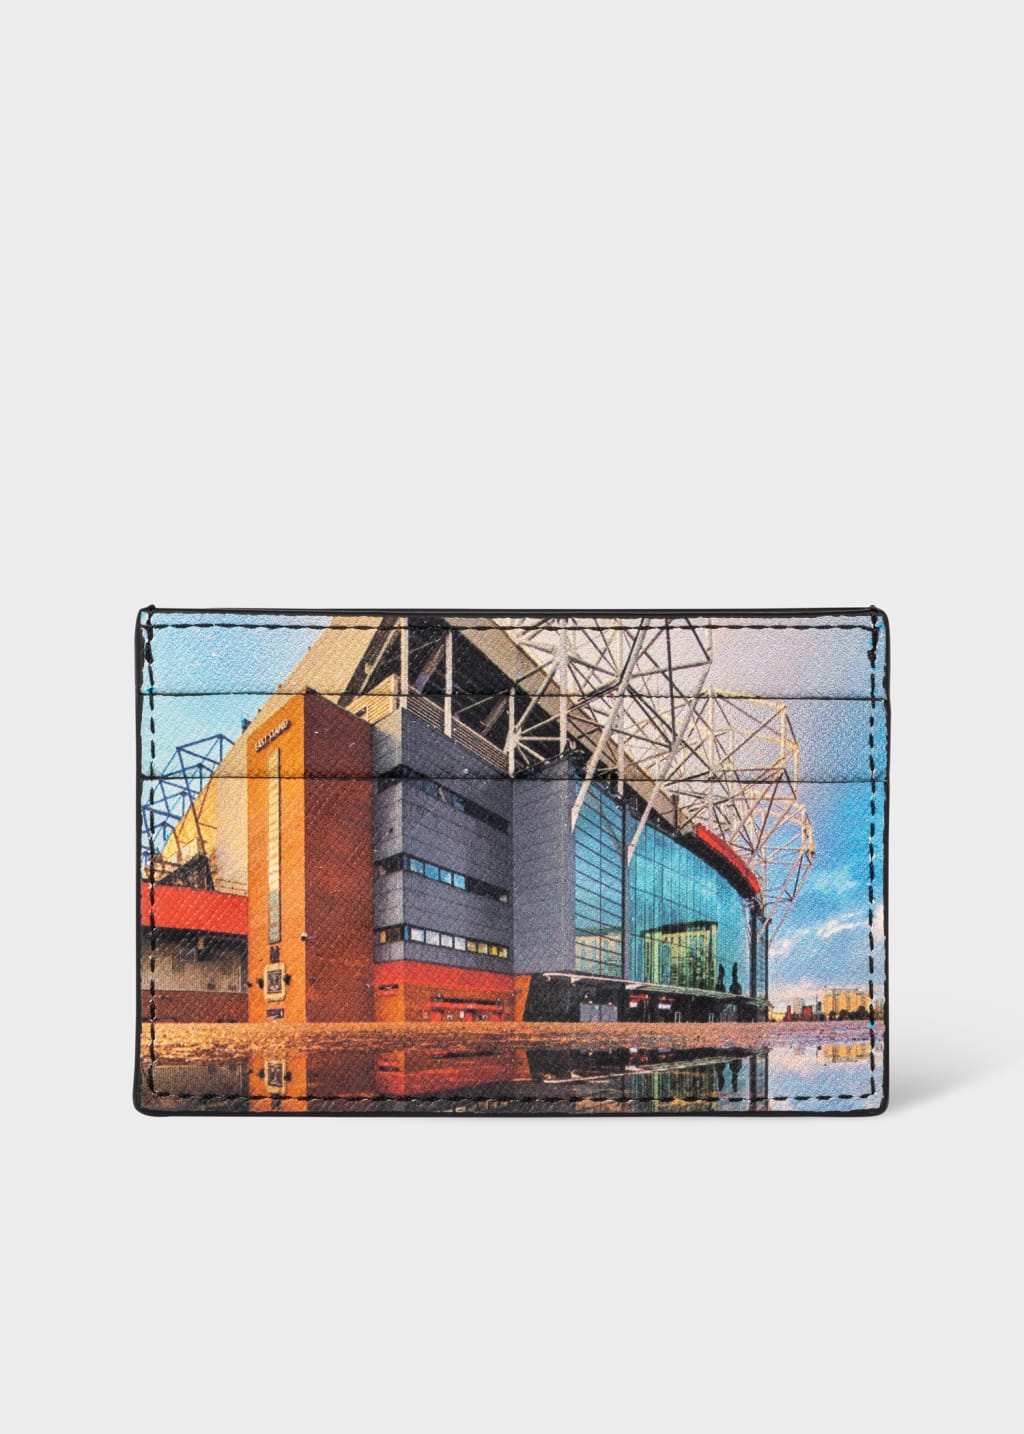 Front View - Paul Smith & Manchester United - 'Stadium' Print Card Holder Paul Smith